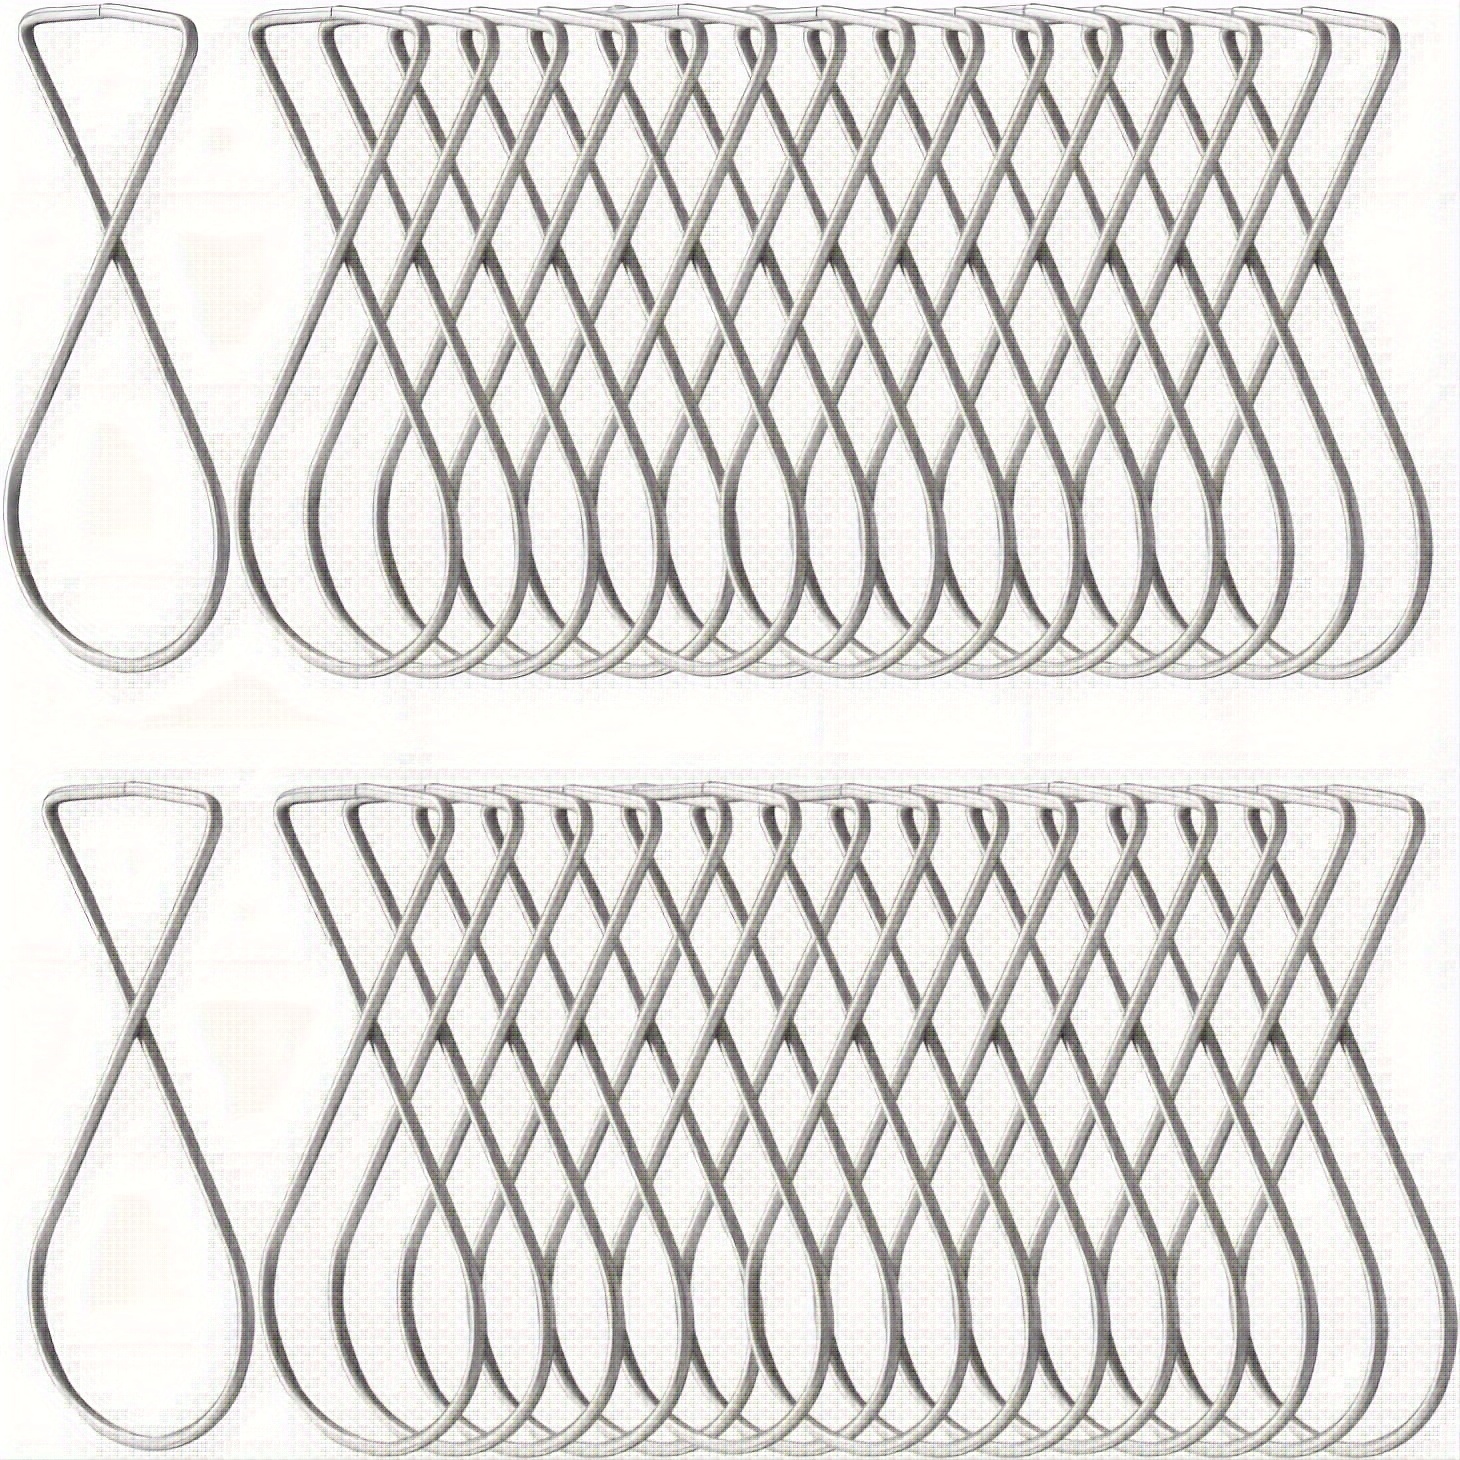 Moxweyeni 35 Packs Drop Ceiling Hooks Ceiling Hanger Clear Ceiling Grid  Clips with 35 Metal S-Hooks for Hanging Plants Office Signs New Y